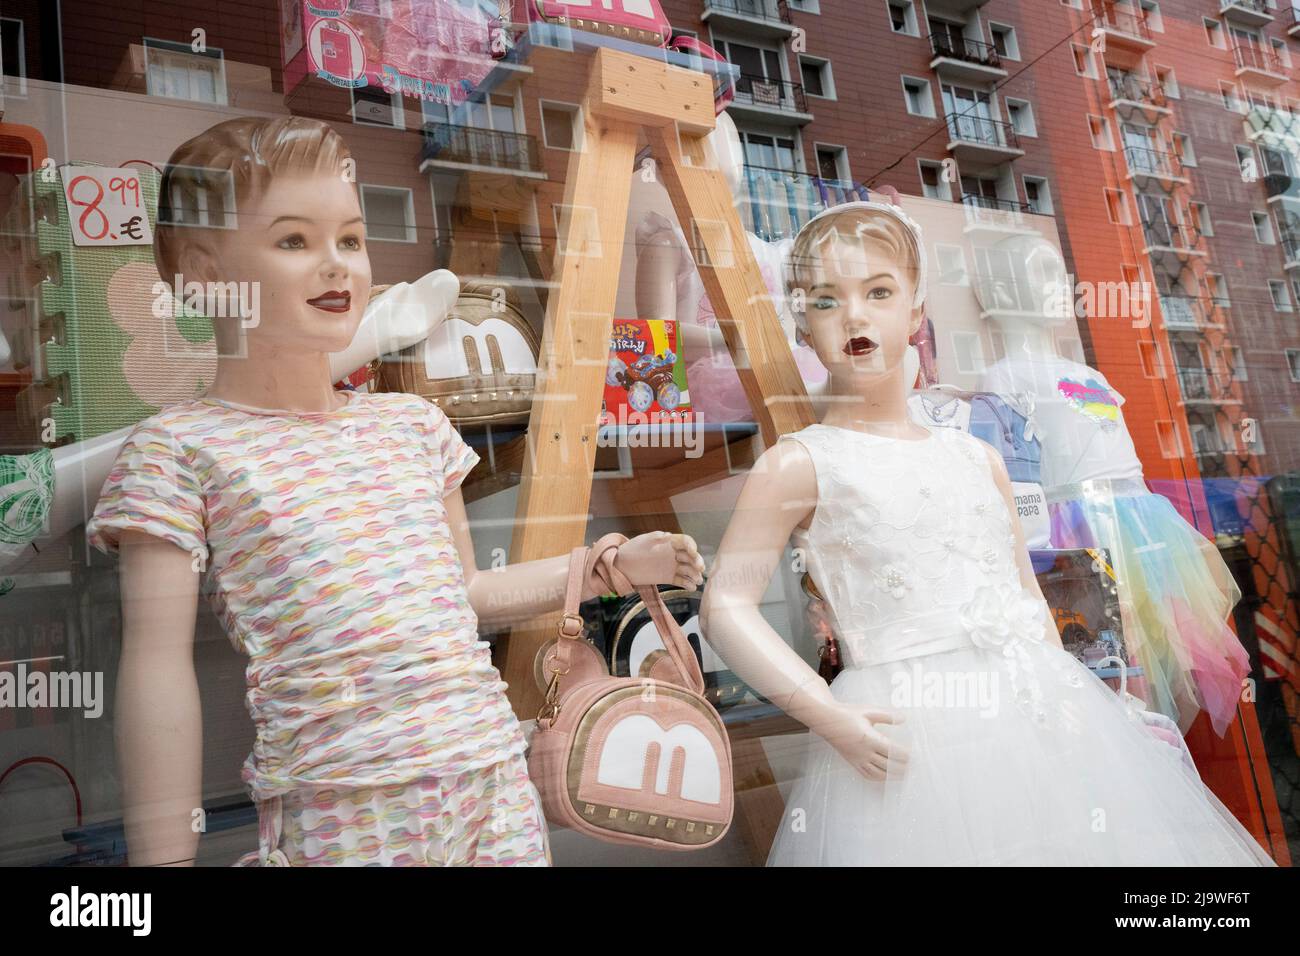 With residential apartments reflected in the background, childrens' mannequins are seen in a clothing retailer's window in central Bilbao, on 21st May 2022, in Bilbao, Cantabria, Spain. Stock Photo